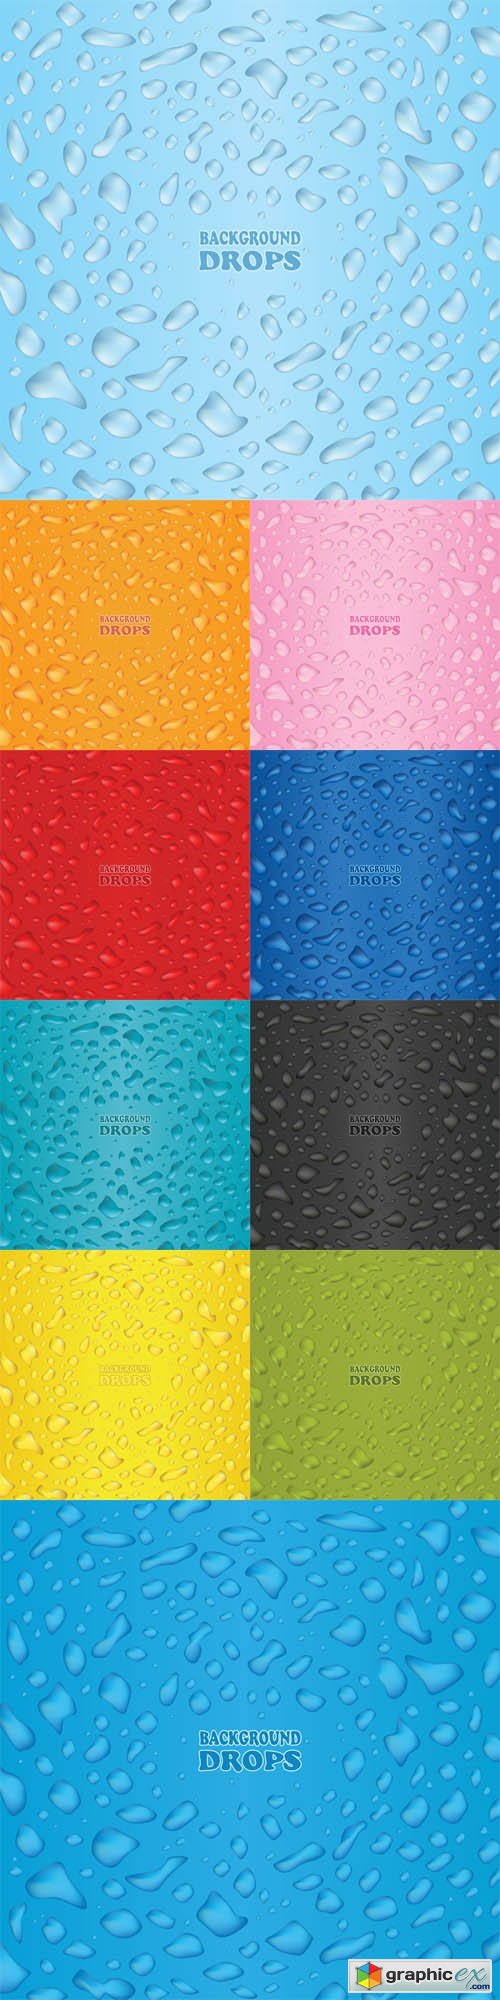 Backgrounds of Water Drops